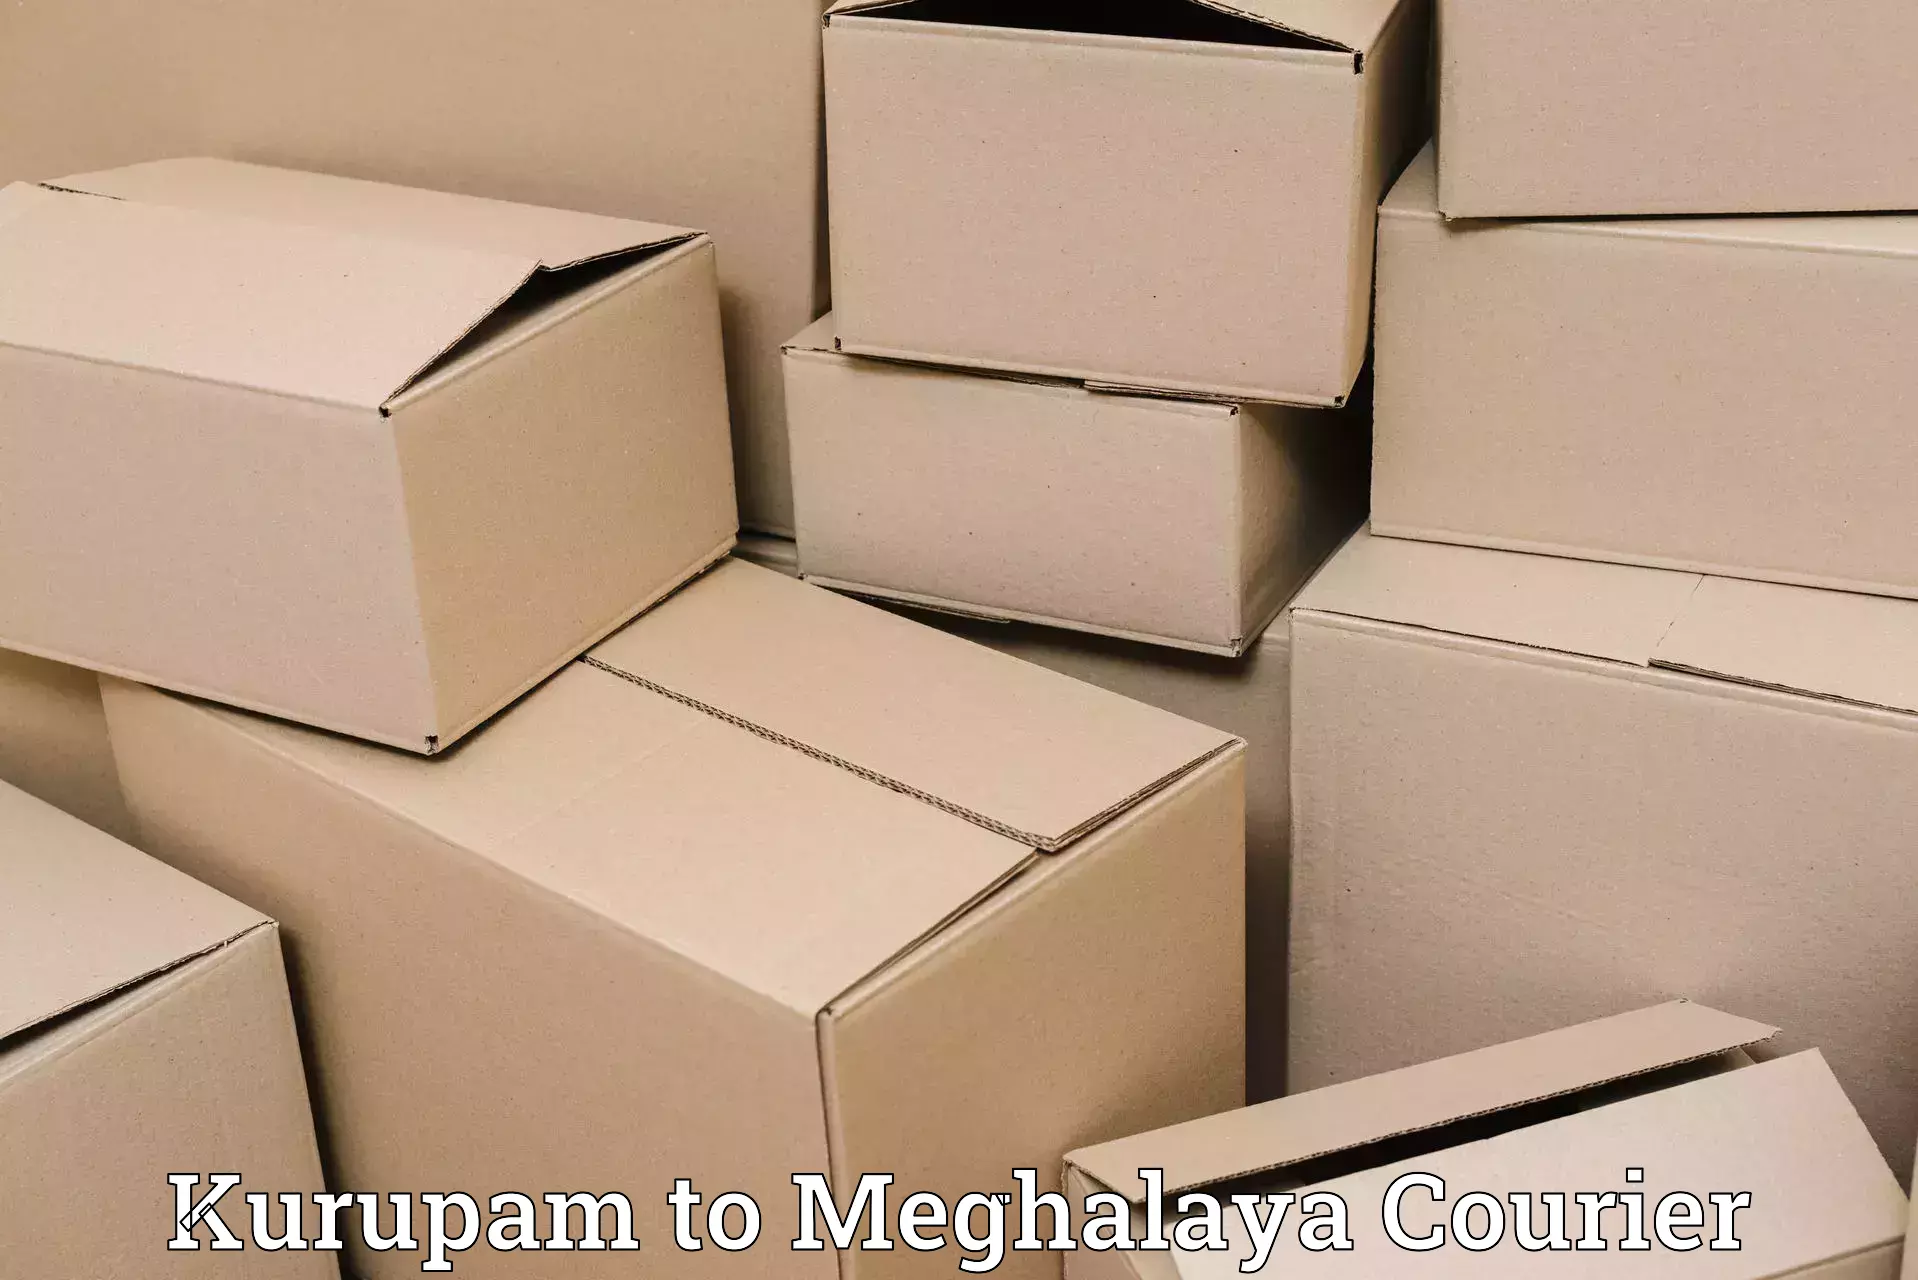 24-hour courier service in Kurupam to Umsaw